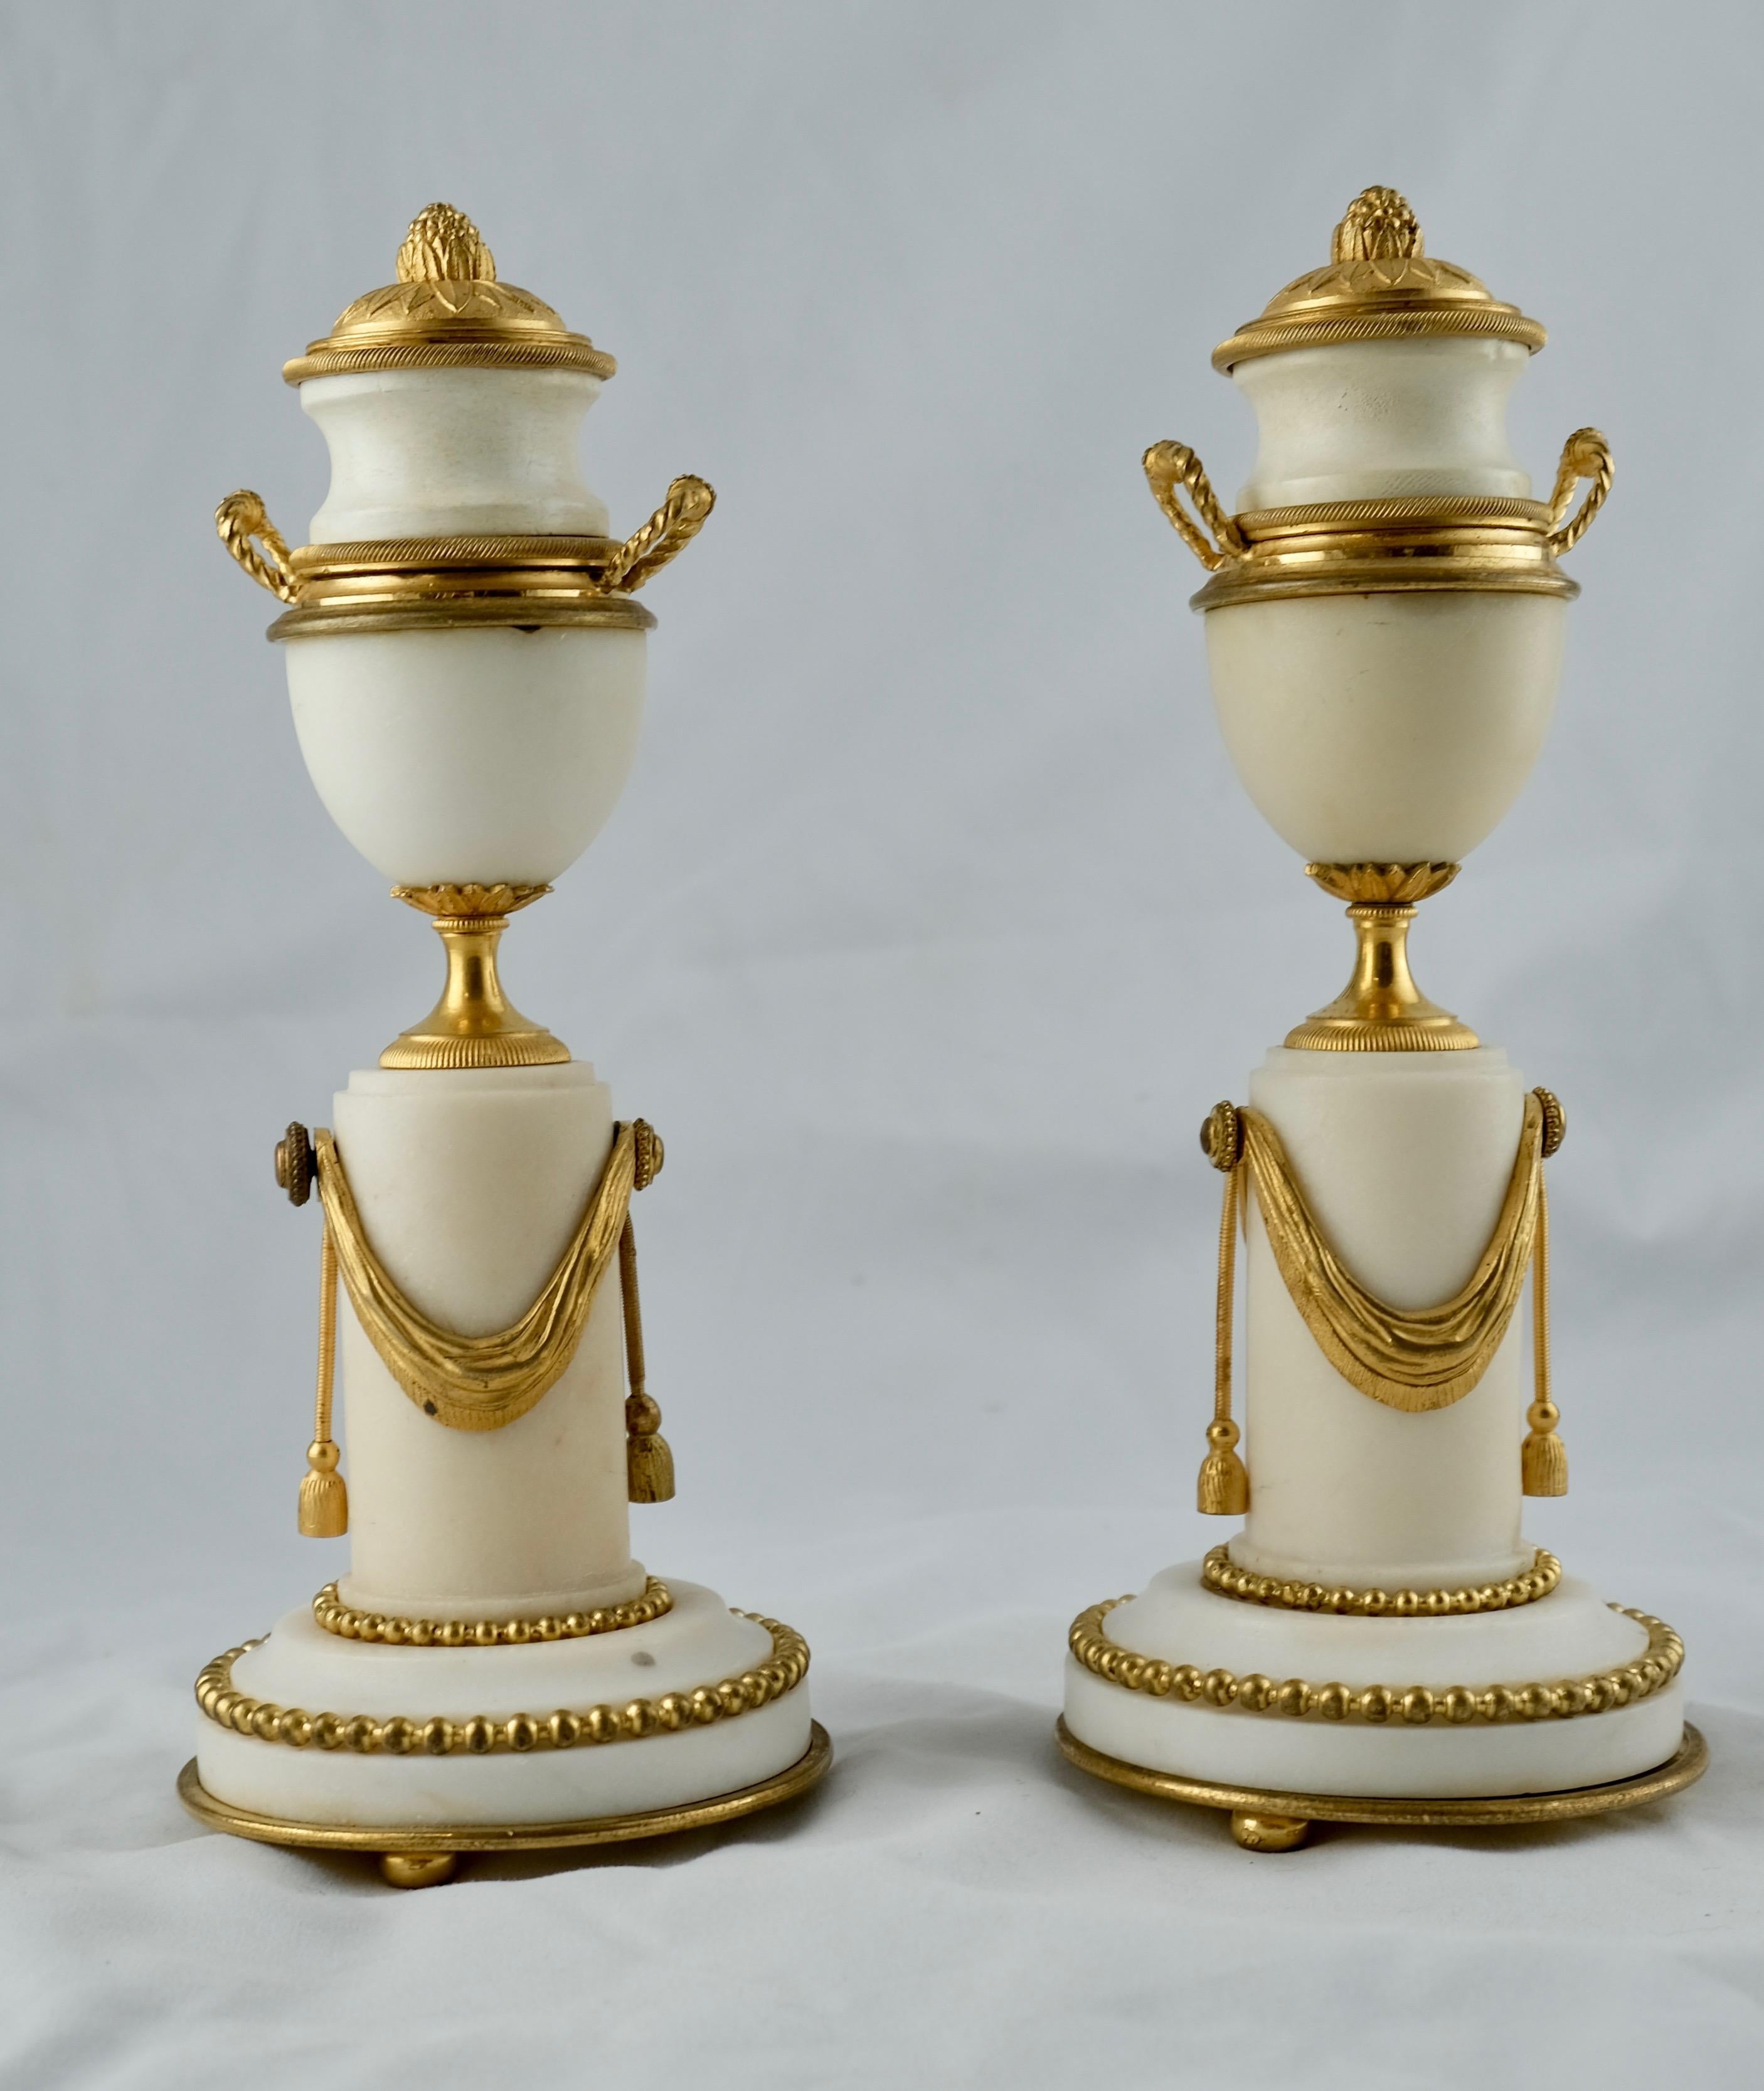 French Pair of Casolettes, Late 18th C